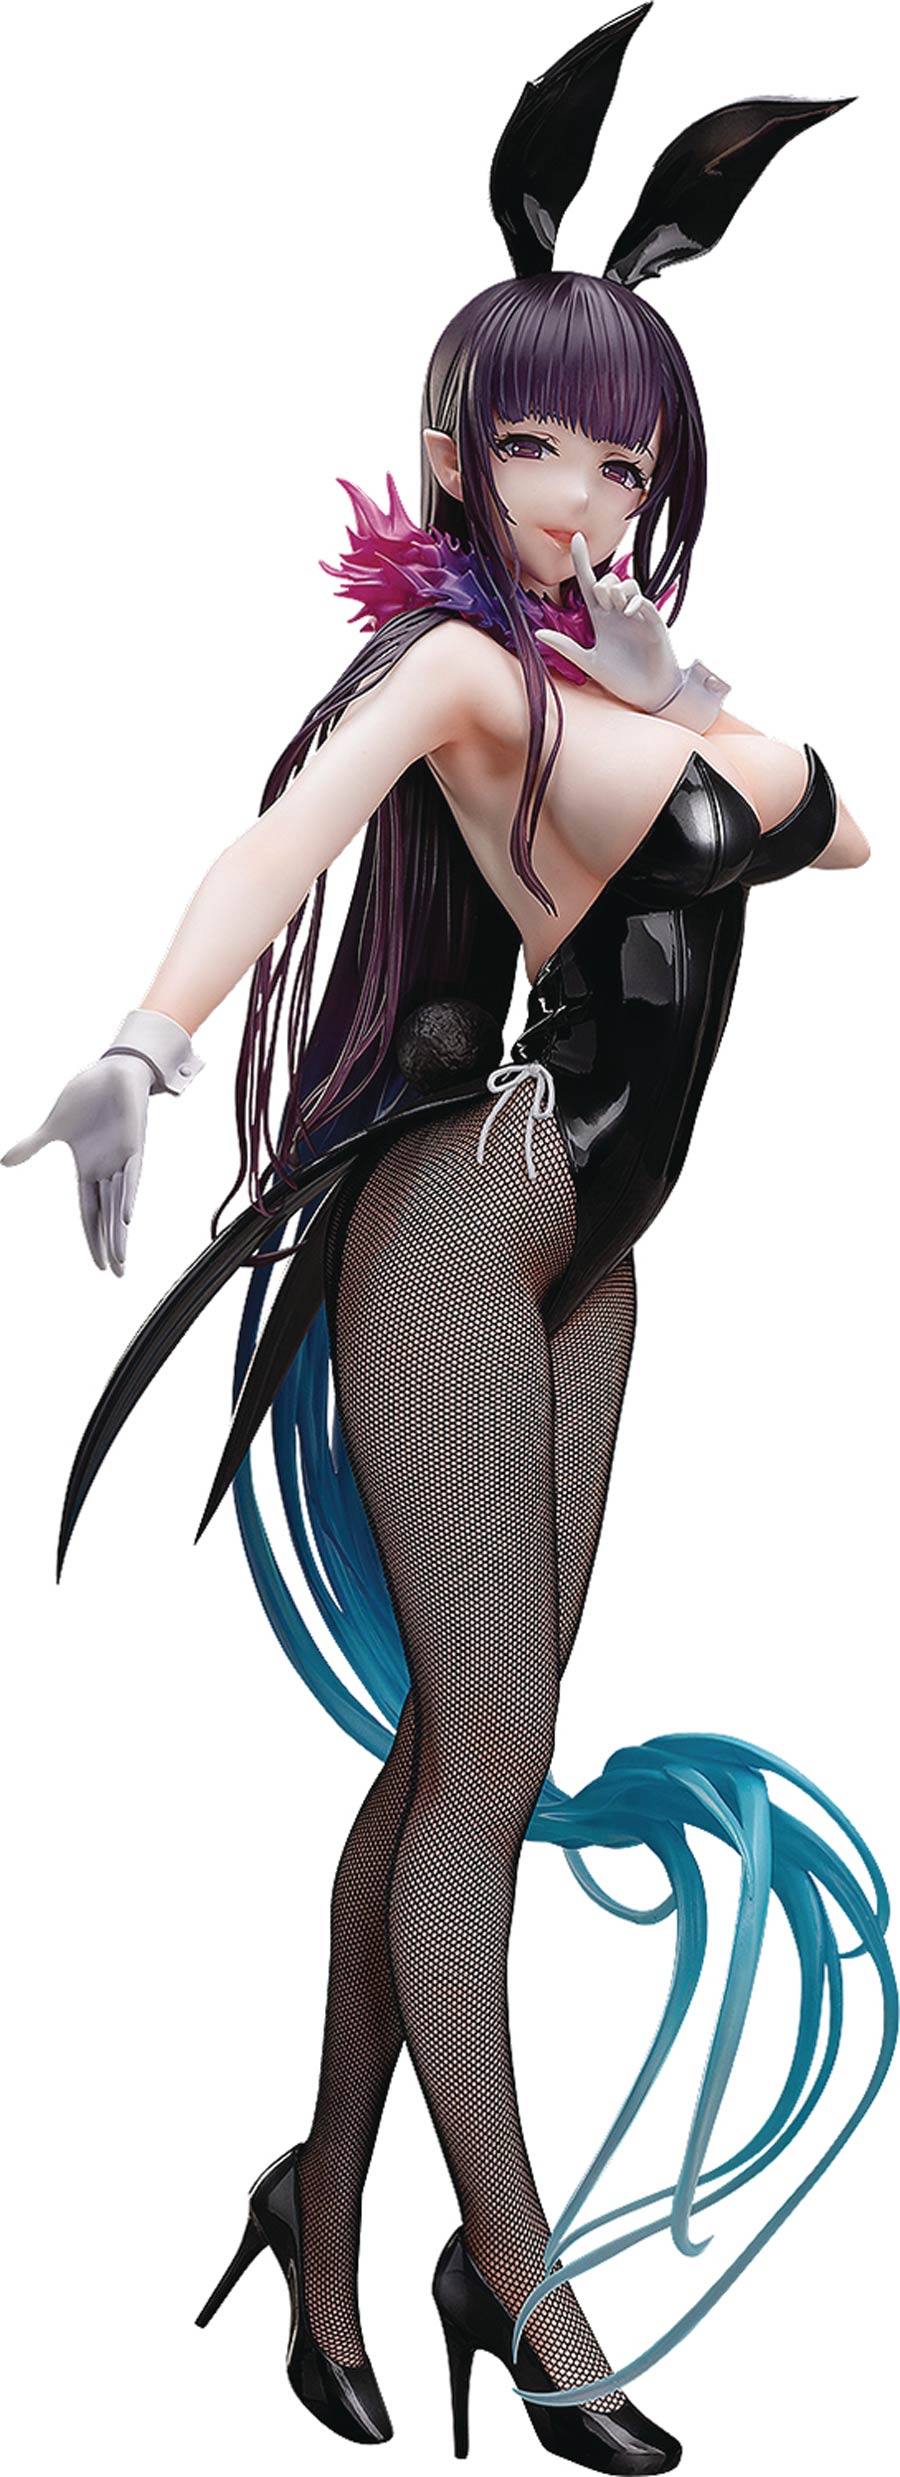 Elder Sister-Like One Chiyo Bunny Outfit 1/4 Scale PVC Figure